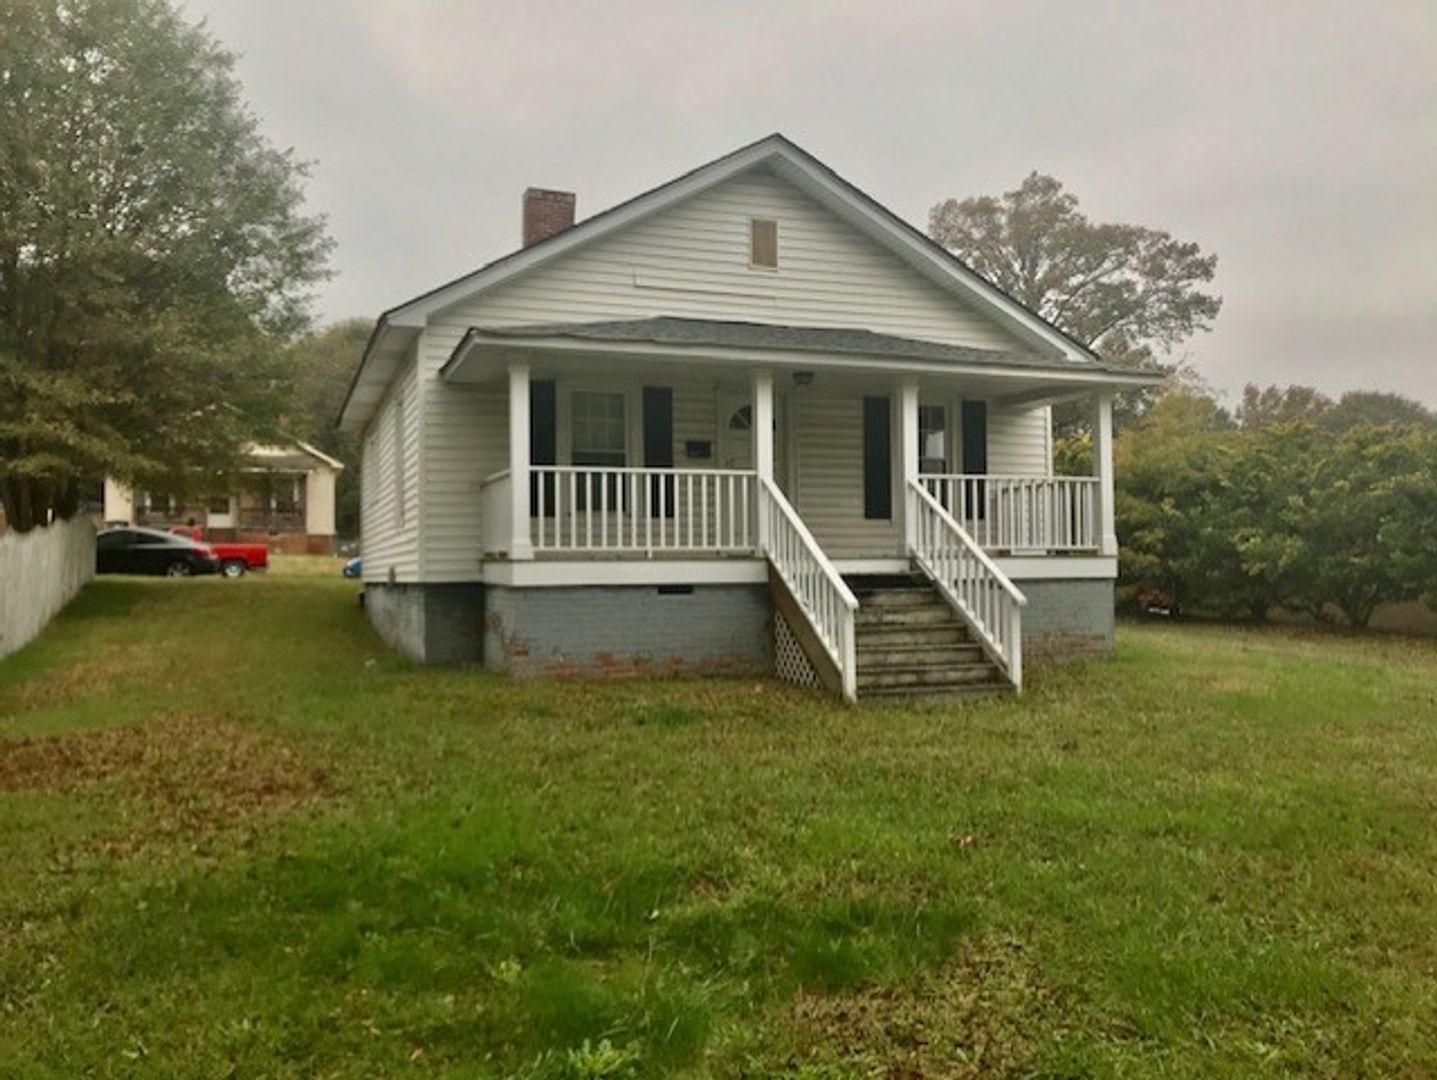 Must see this Newly renovated 2 bedroom 1 bath home located in Kannapolis